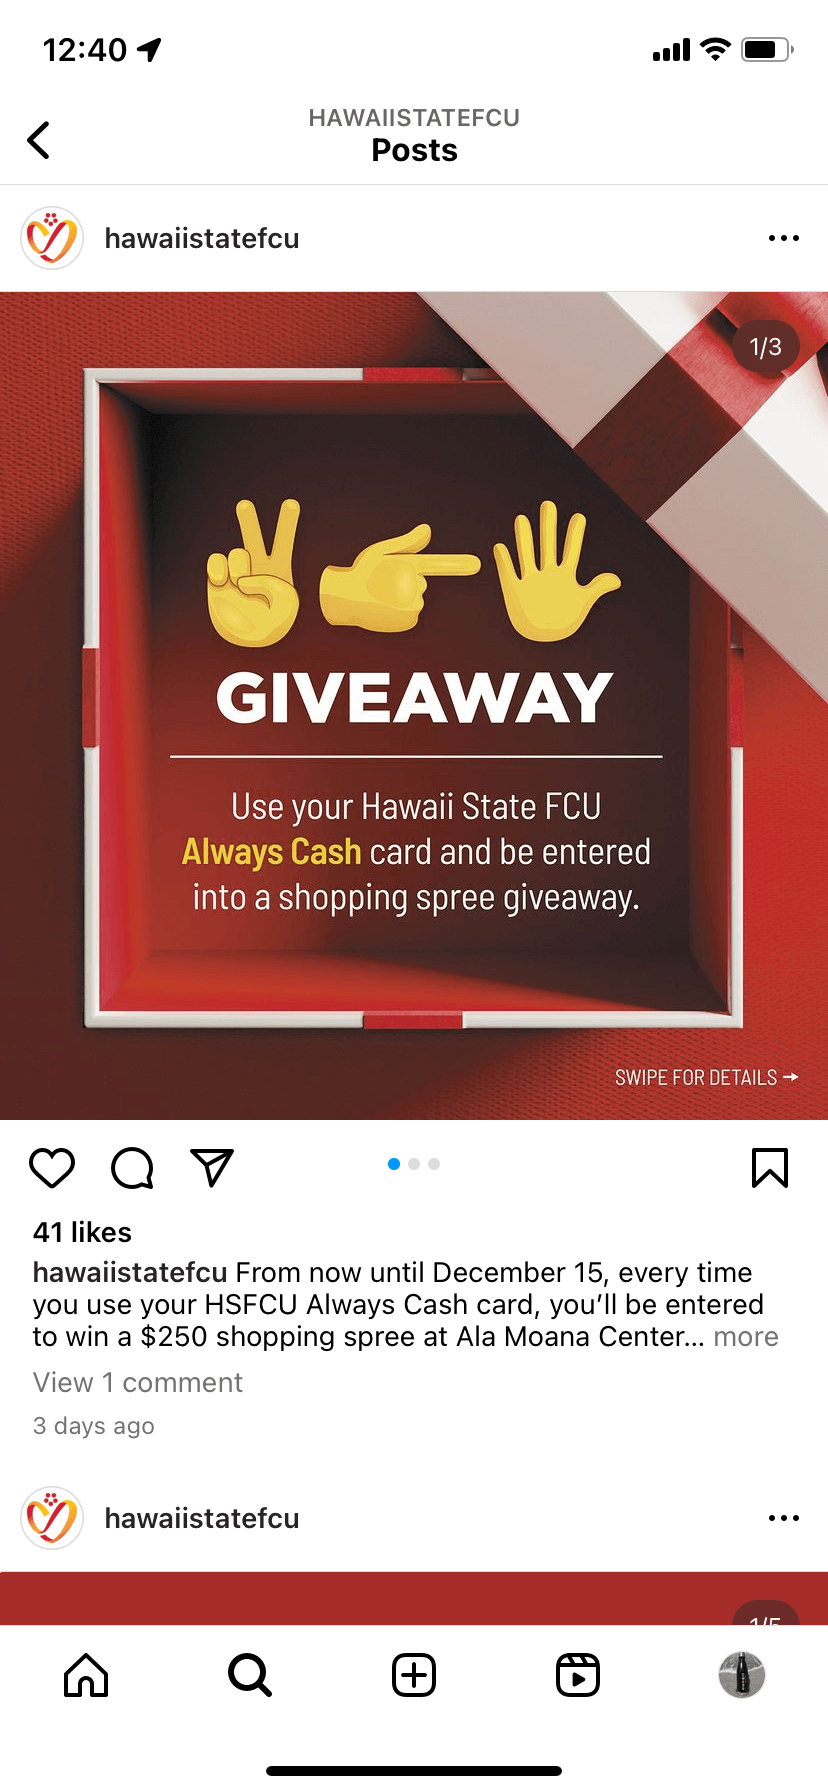 Promotional-image-for-a-giveaway-by-Hawaii-State-Federal-Credit-Union-featuring-hand-gesture-graphics-and-details-about-using-the-Always-Cash-card,-shared-on-credit-union-and-bank-social-media.